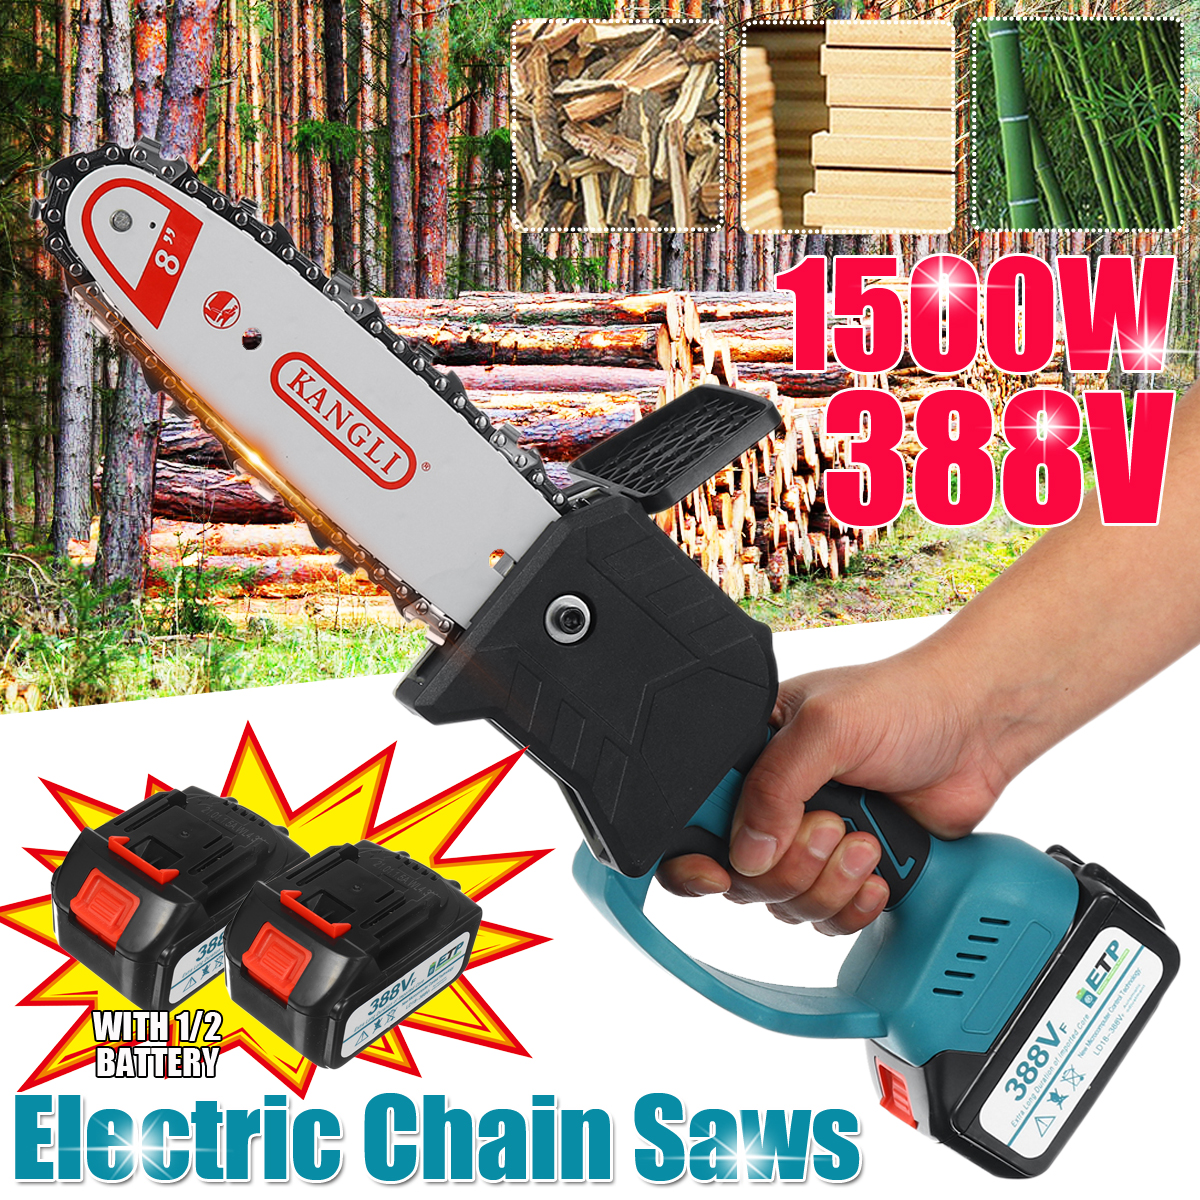 1500W-8inch-Cordless-Electric-Chain-Saw-Brushless-Motor-Power-Tools-Rechargeable-Lithium-Battery-1805588-1